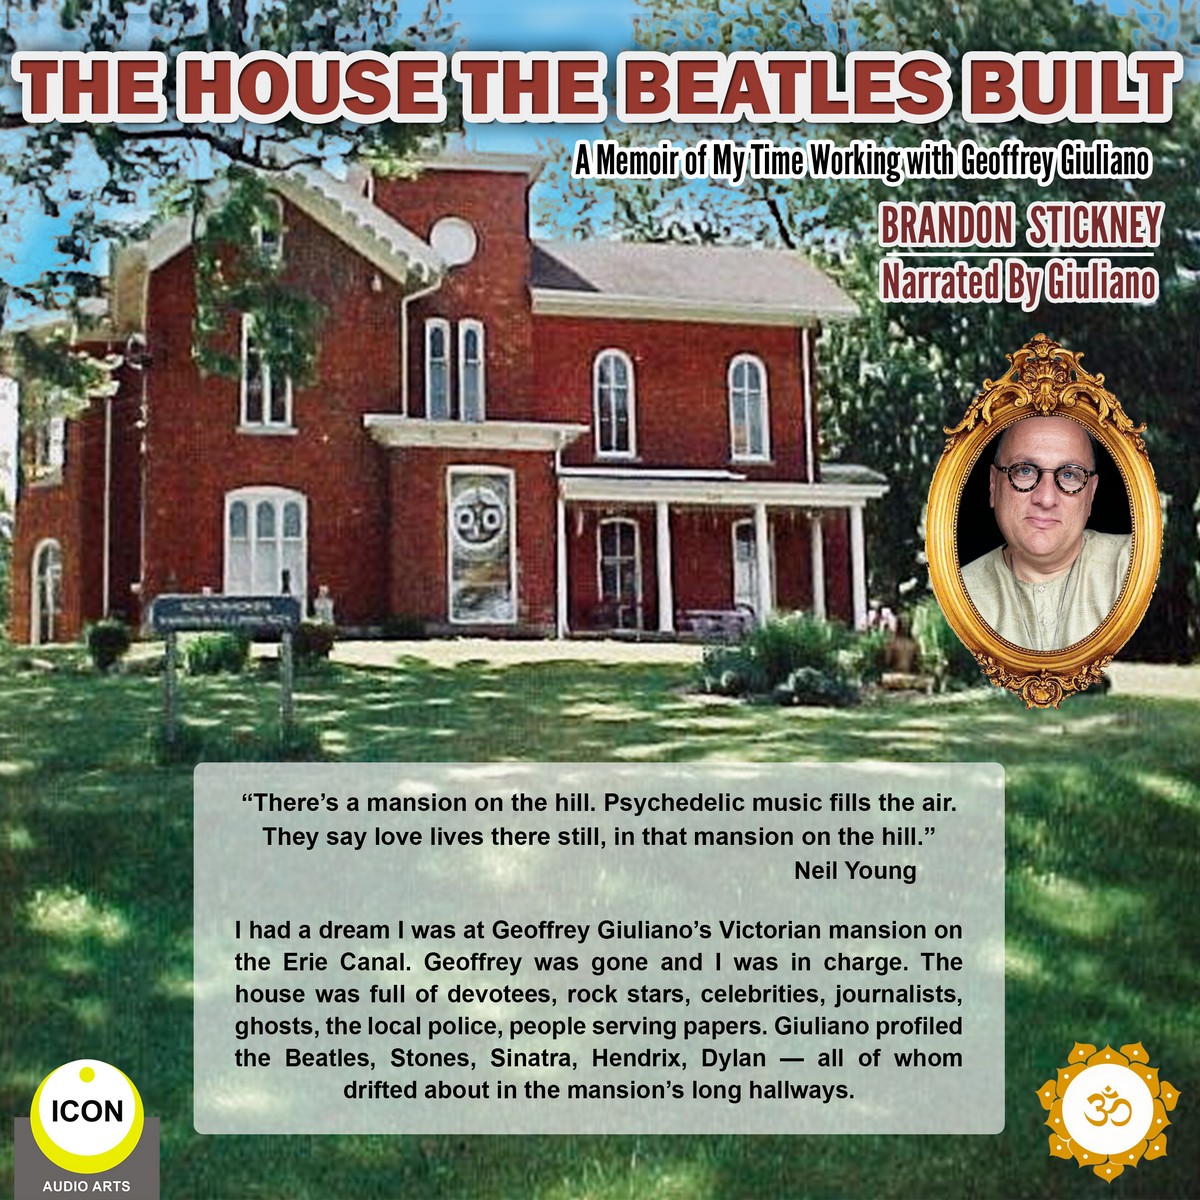 The House the Beatles Built – A Memoir of My Time Working for Geoffrey Giuliano